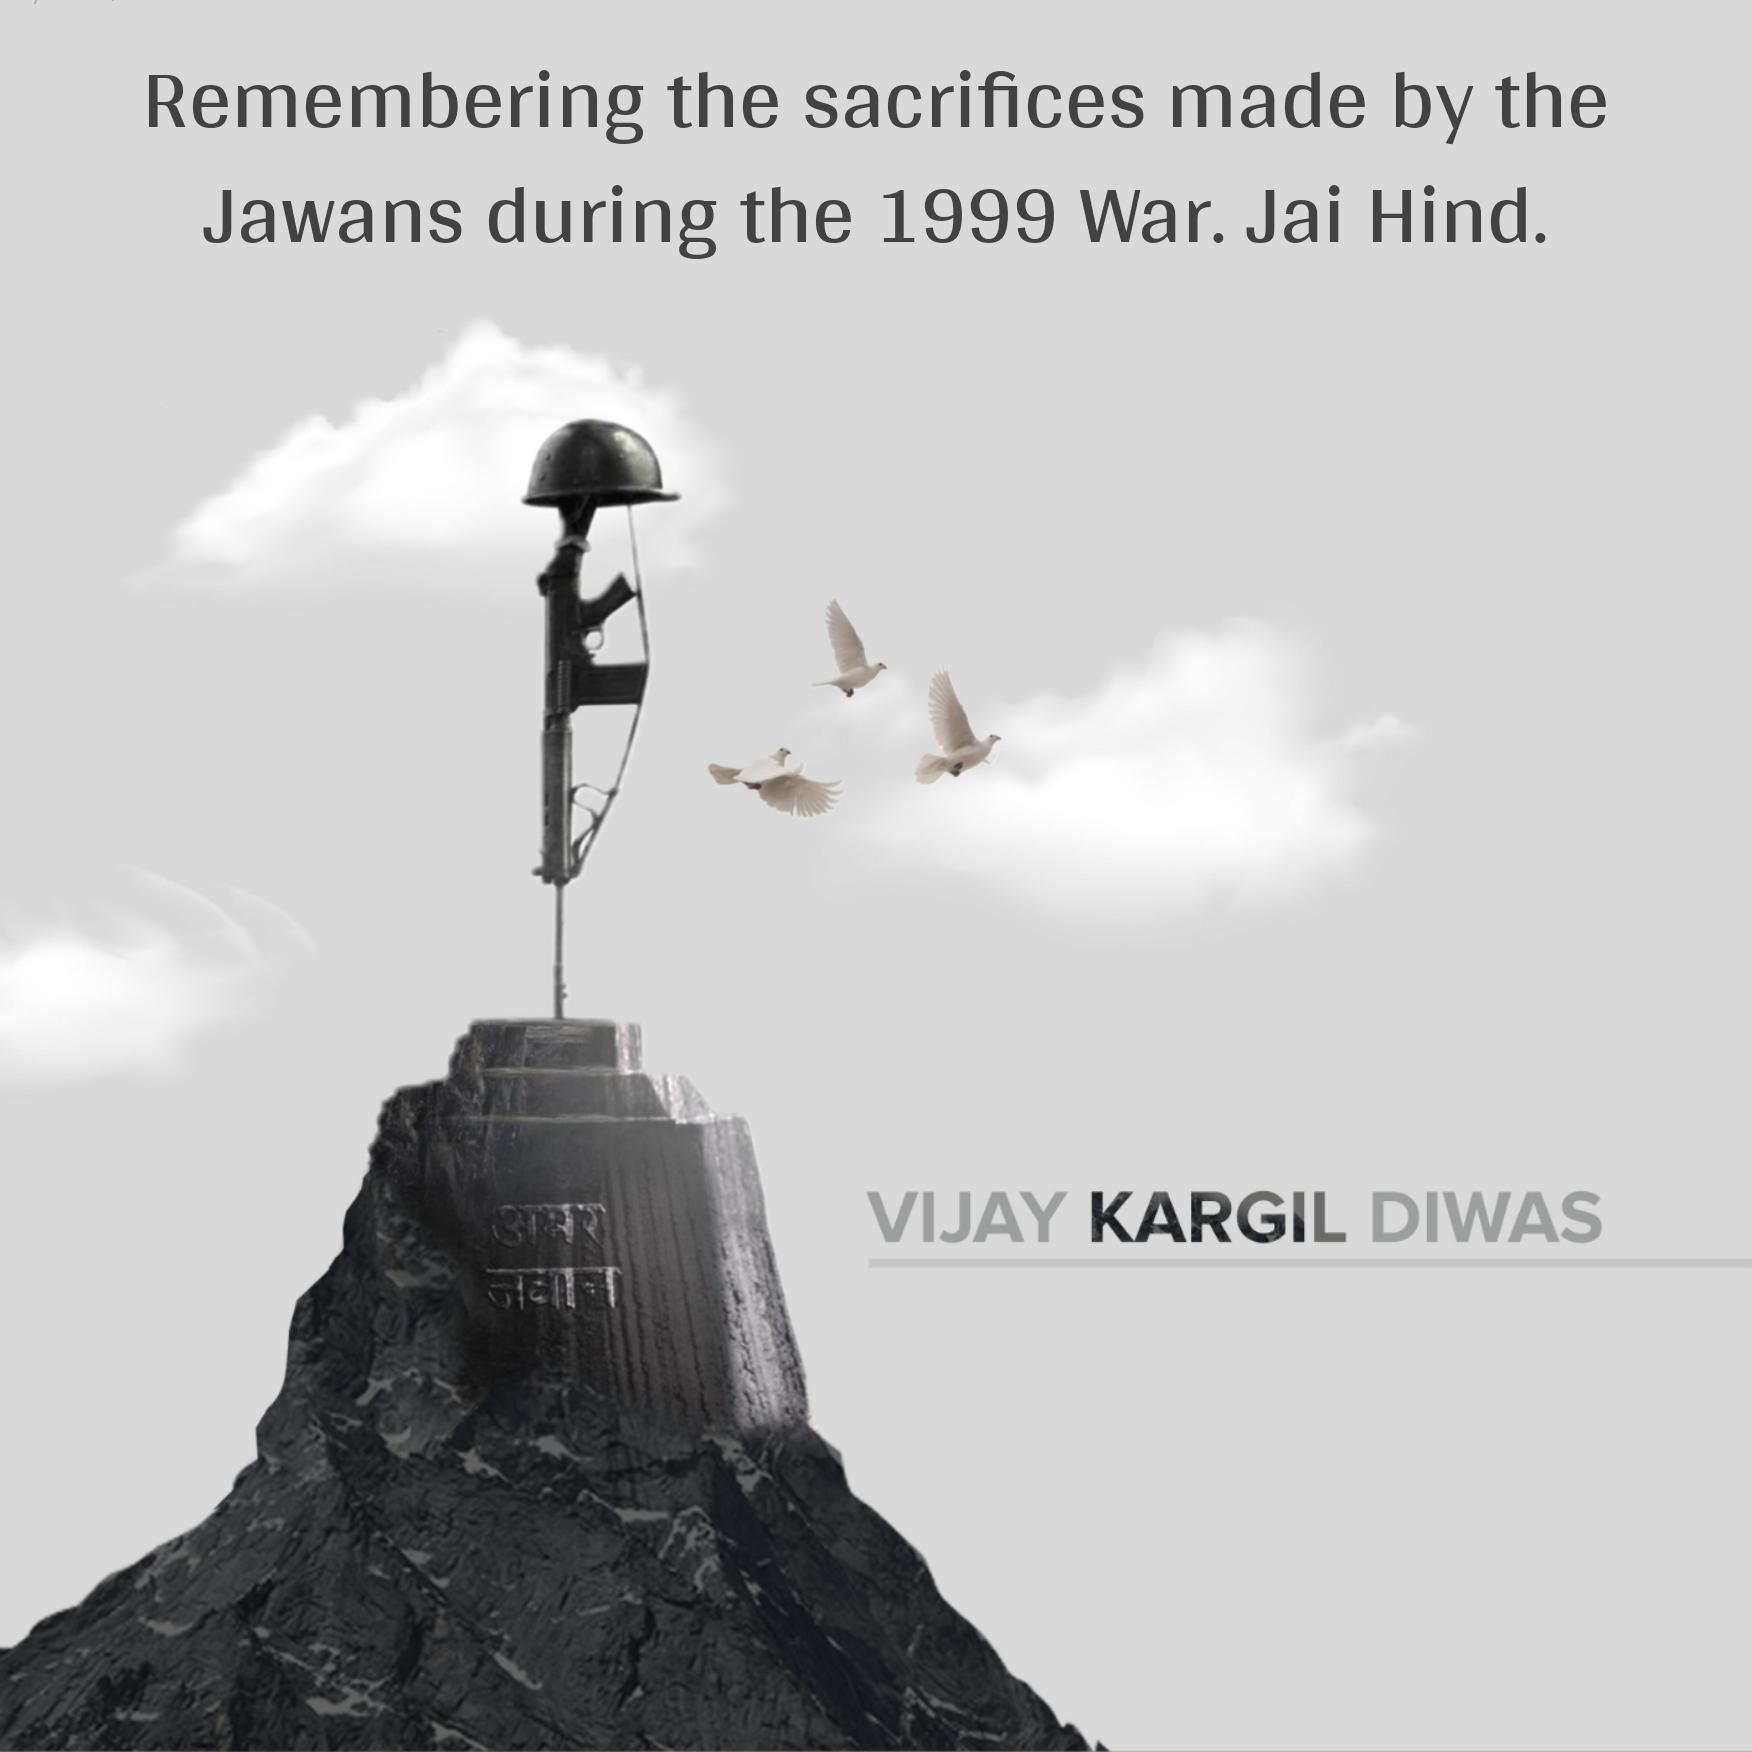 Remembering the sacrifices made by the Jawans during the 1999 War